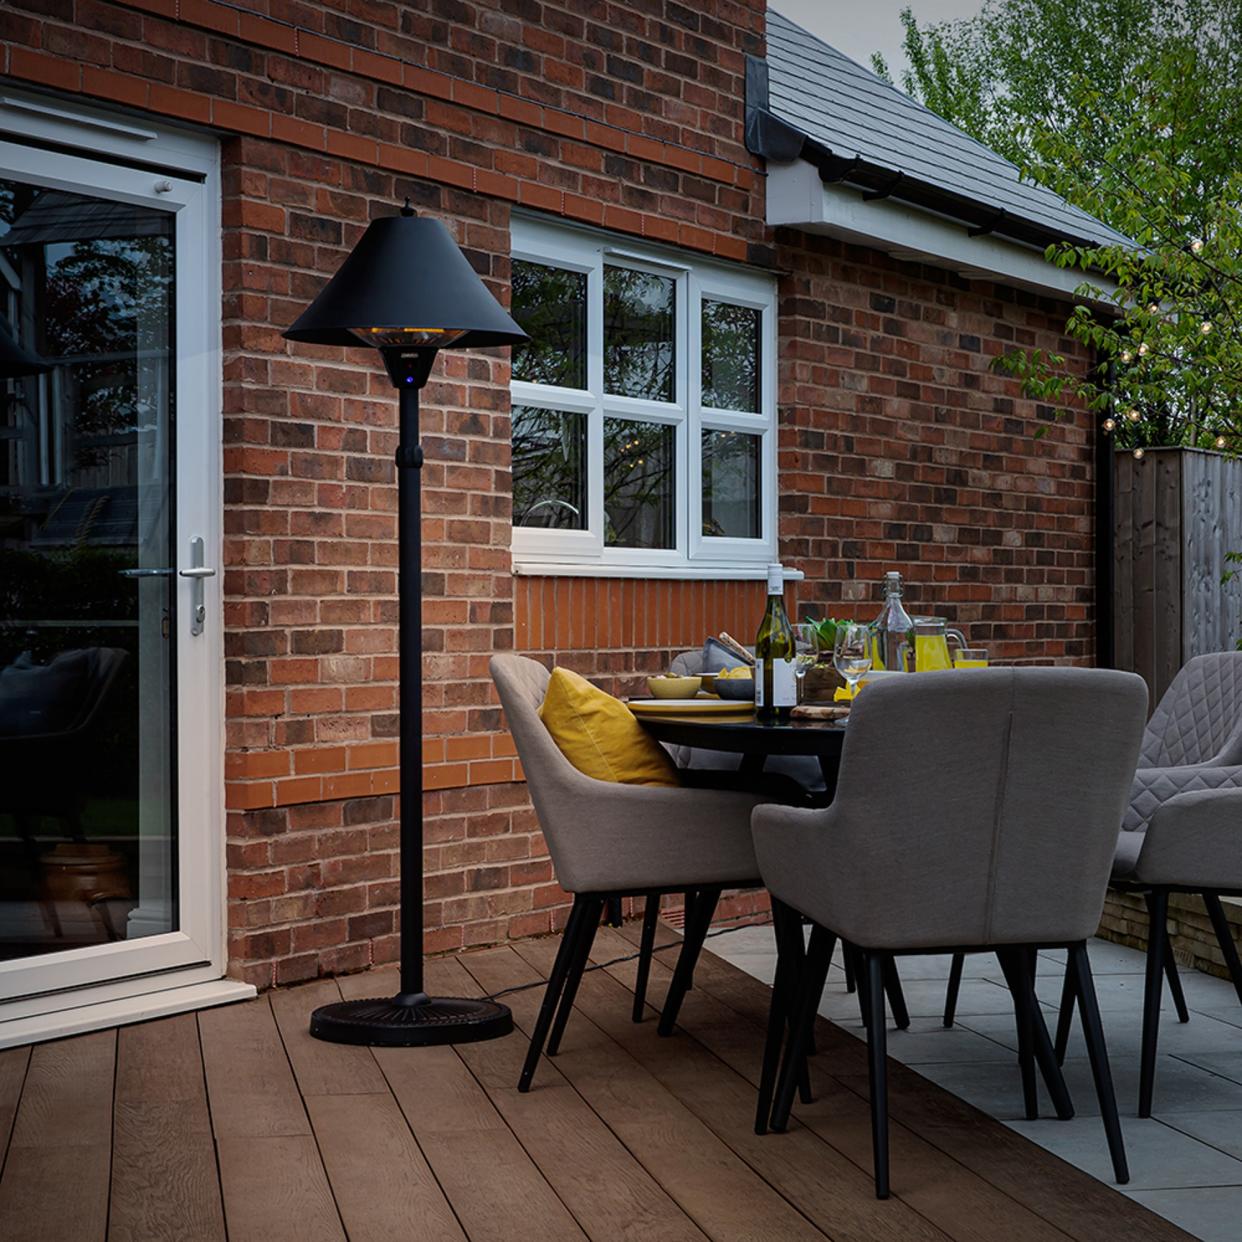  Zanussi 2100W Black Adjustable Freestanding Patio Heater in a garden with tables and chairs. 